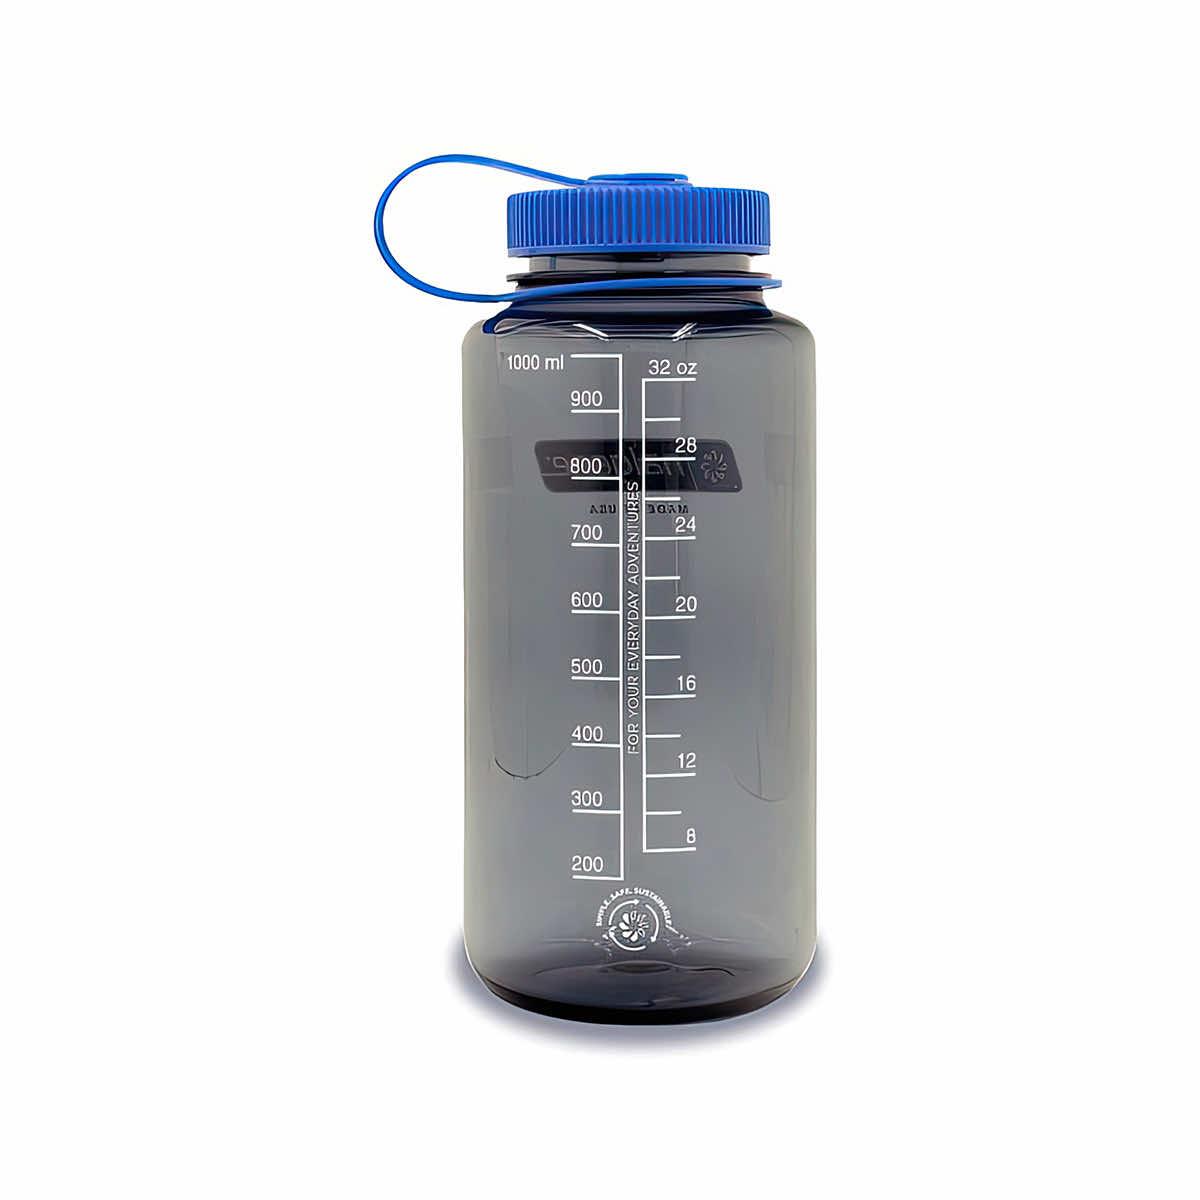 GRANDTIES 32 oz. Classic Silver Travel Water Bottle - Wide Mouth